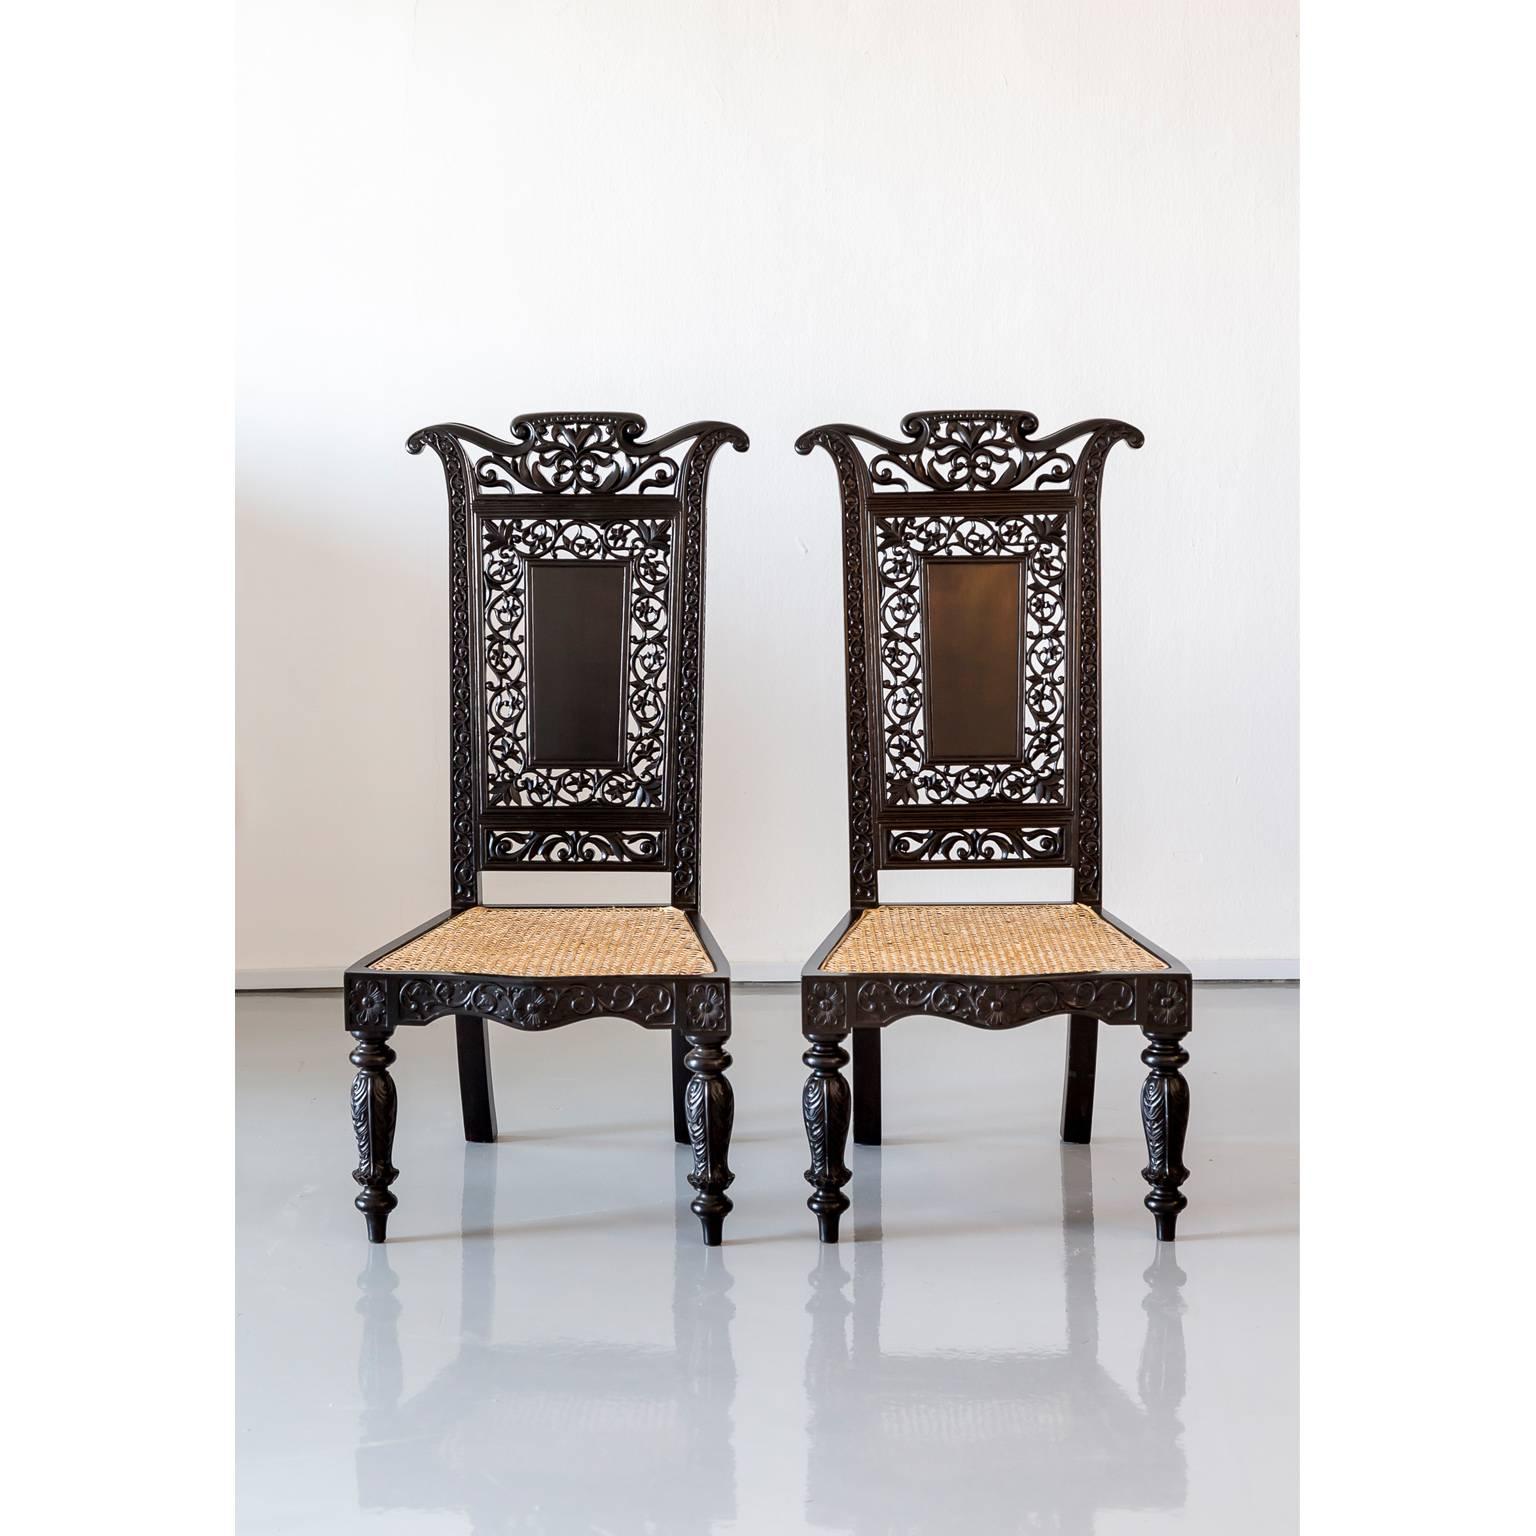 An exceptional pair of British Colonial Prie-Dieu or prayer chairs made in ebony with a caned seat. The back with a solid ebony rectangular block in the middle surrounded by a carved and pierced floral design while the uprights of the back are